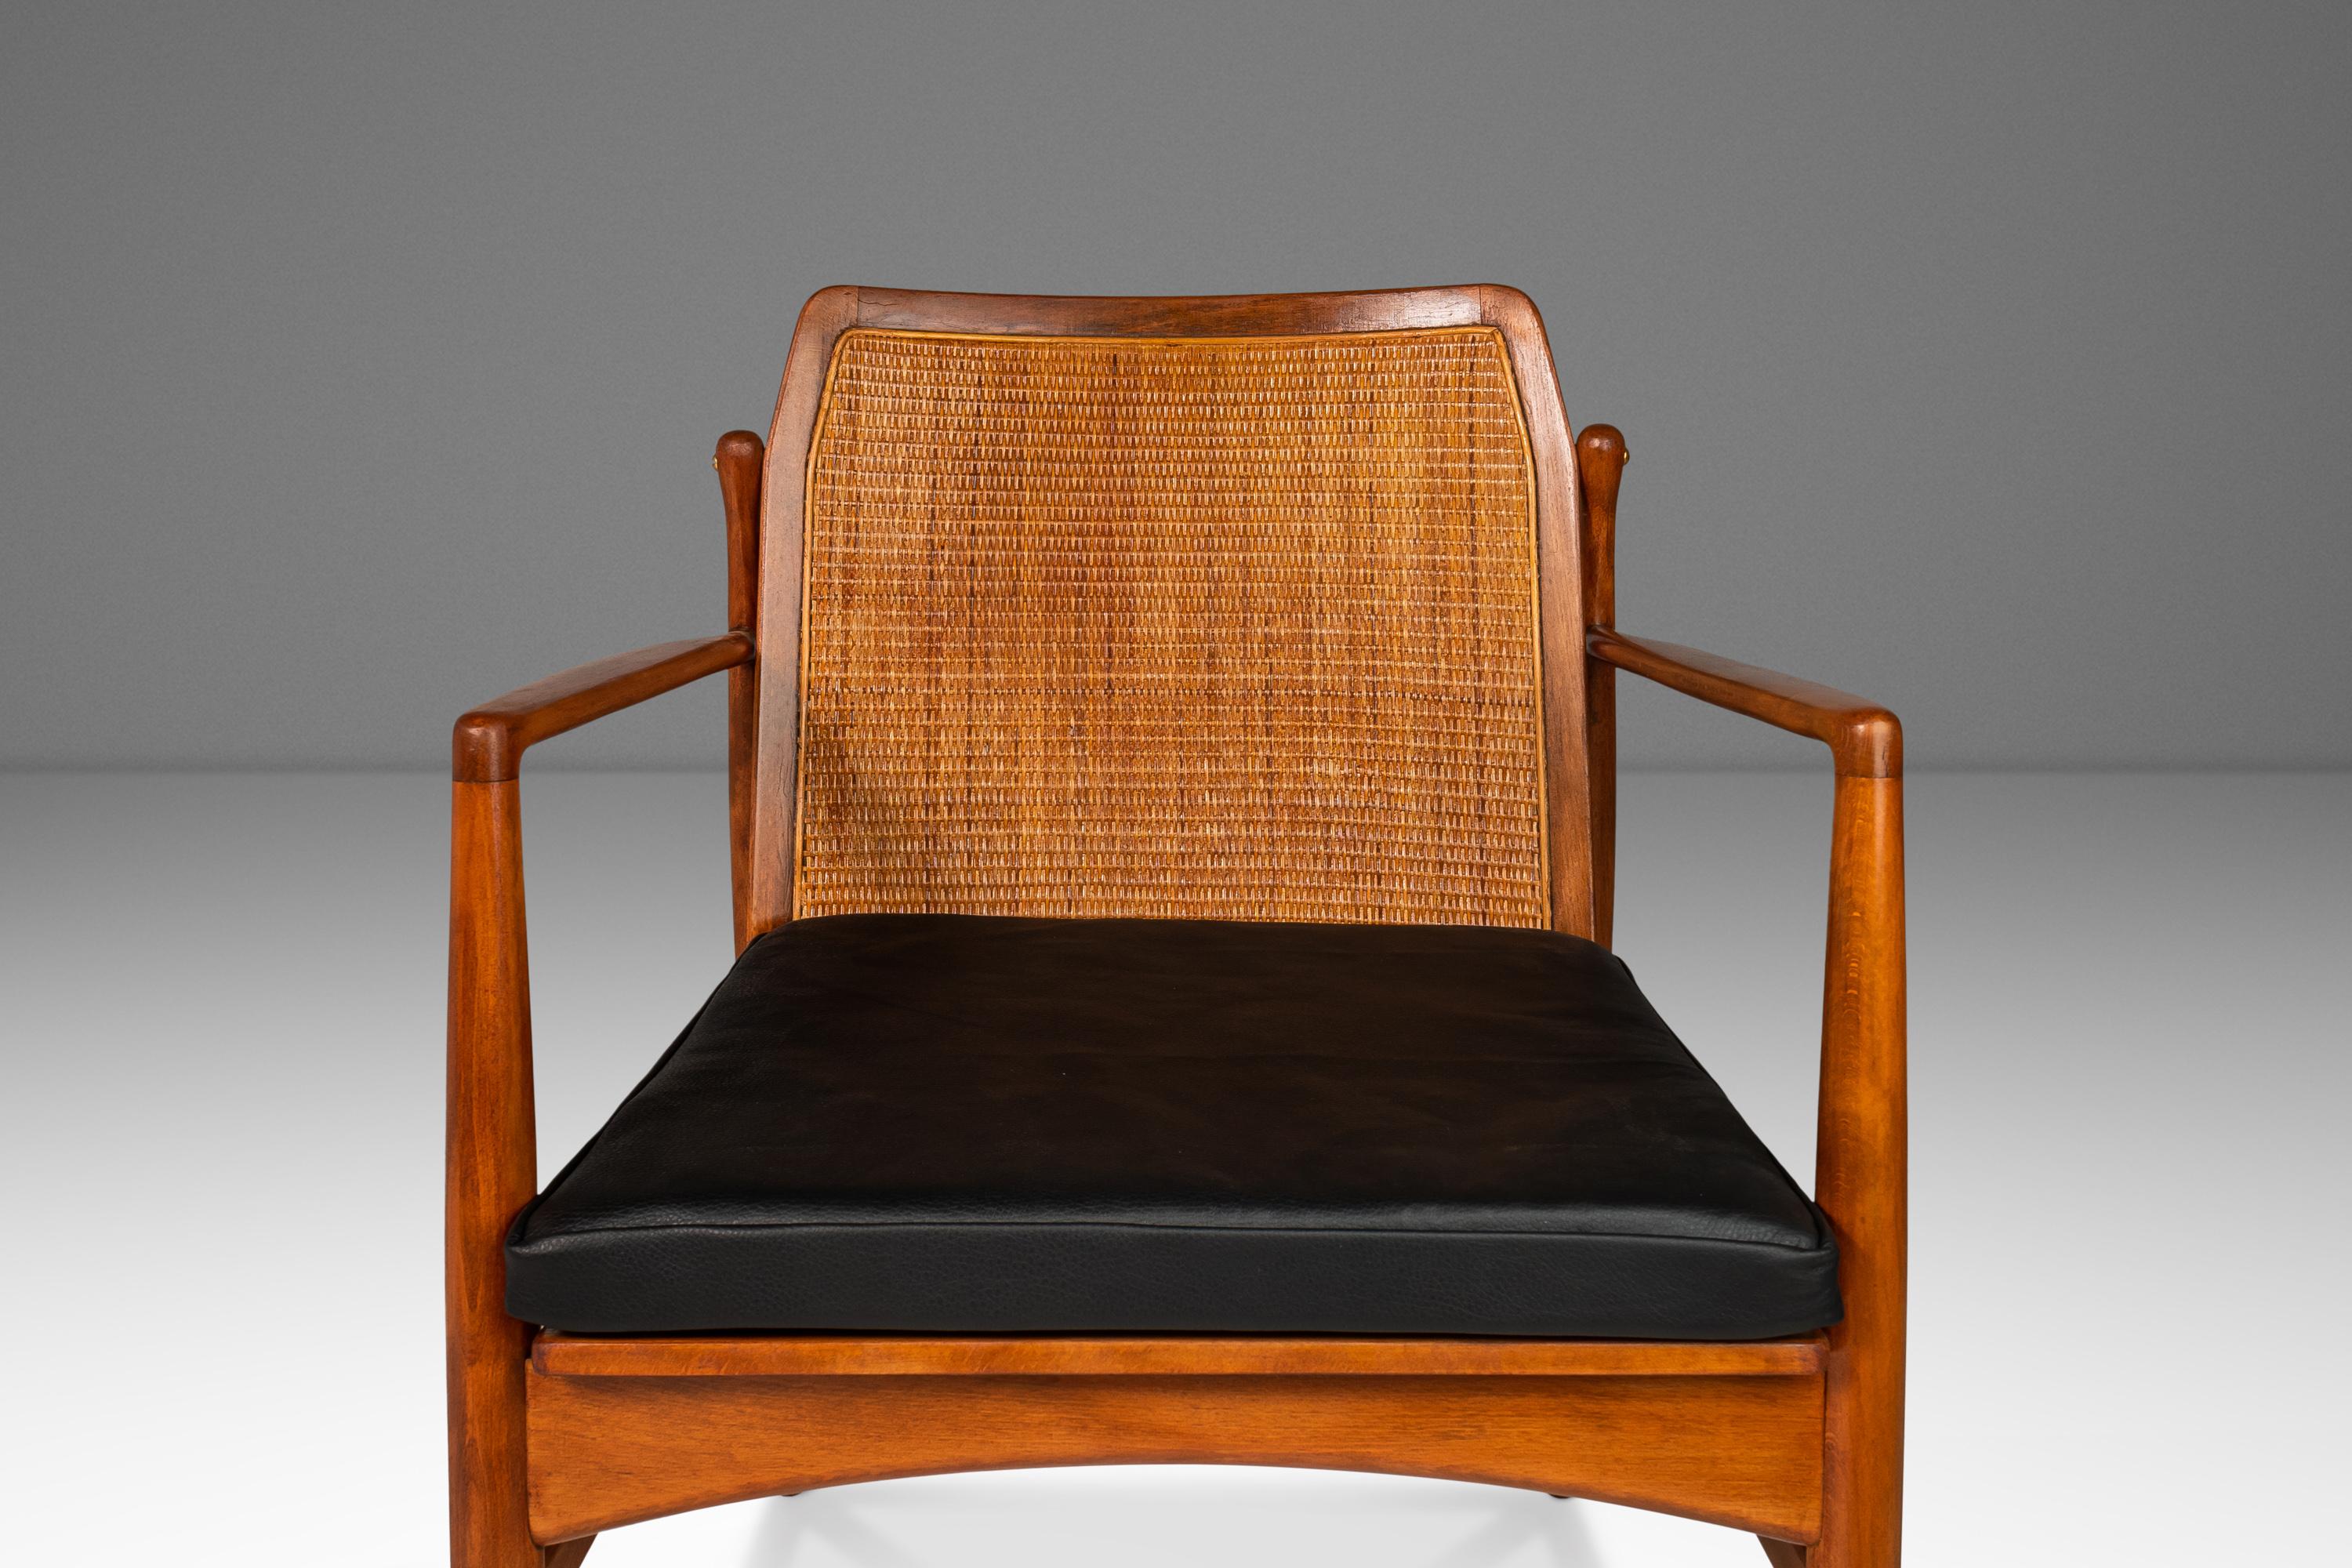 Mid-20th Century Danish Modern Lounge Chair w/ Cane Back by Ib Kofod Larsen for Selig, c. 1960's